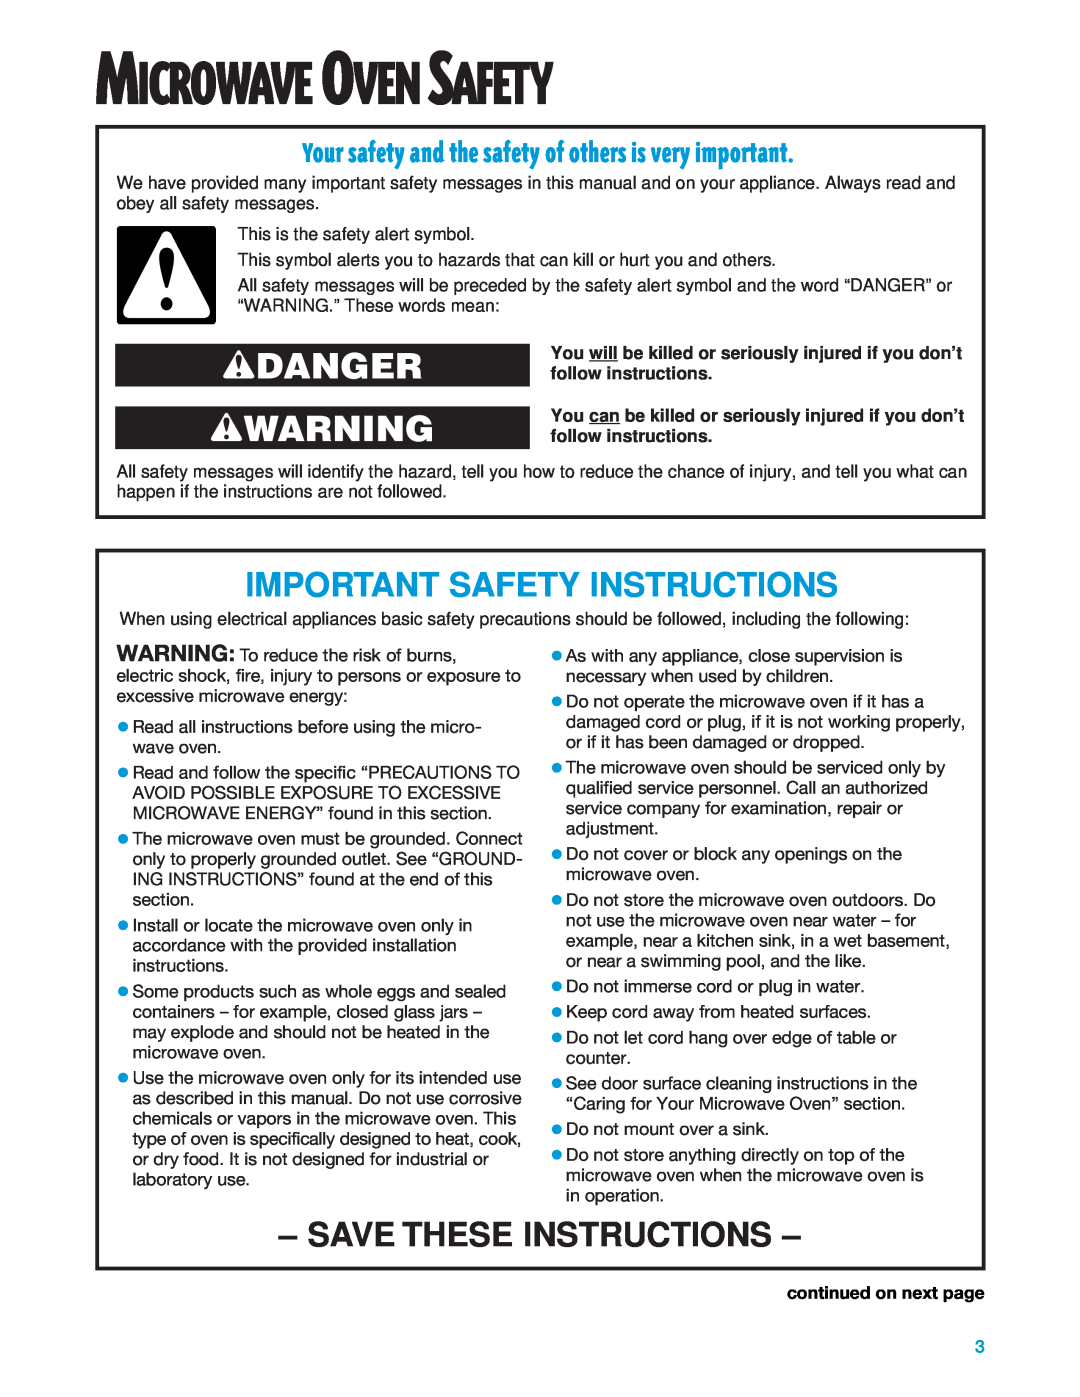 Whirlpool YMH7140XF wDANGER wWARNING, Important Safety Instructions, Save These Instructions, continued on next page 